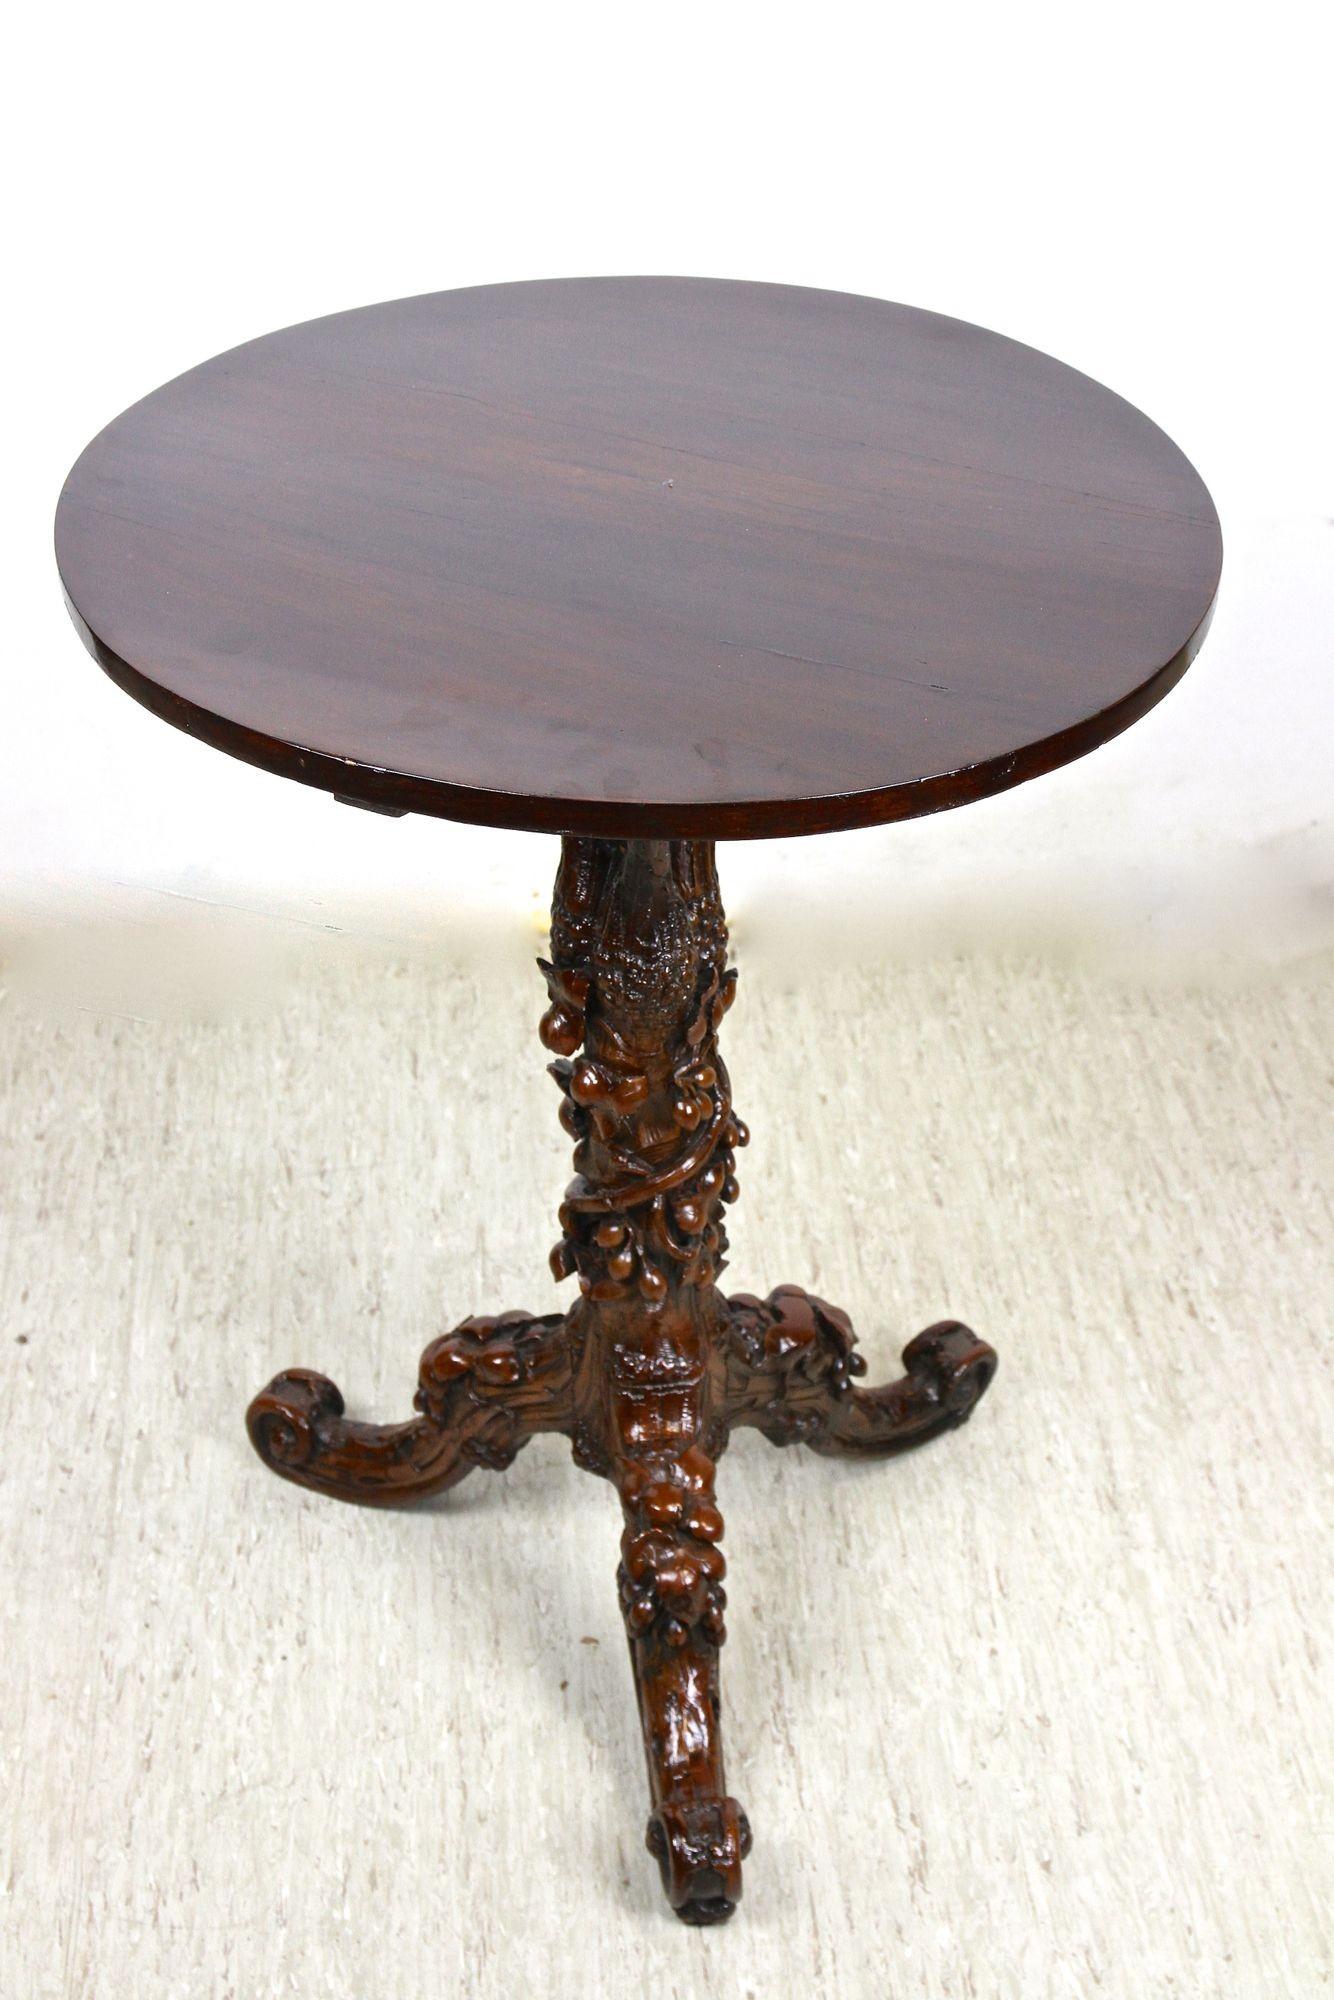 Black Forest Rustic Side Table with Handcarved Vine Theme, Austria, ca. 1880 For Sale 4